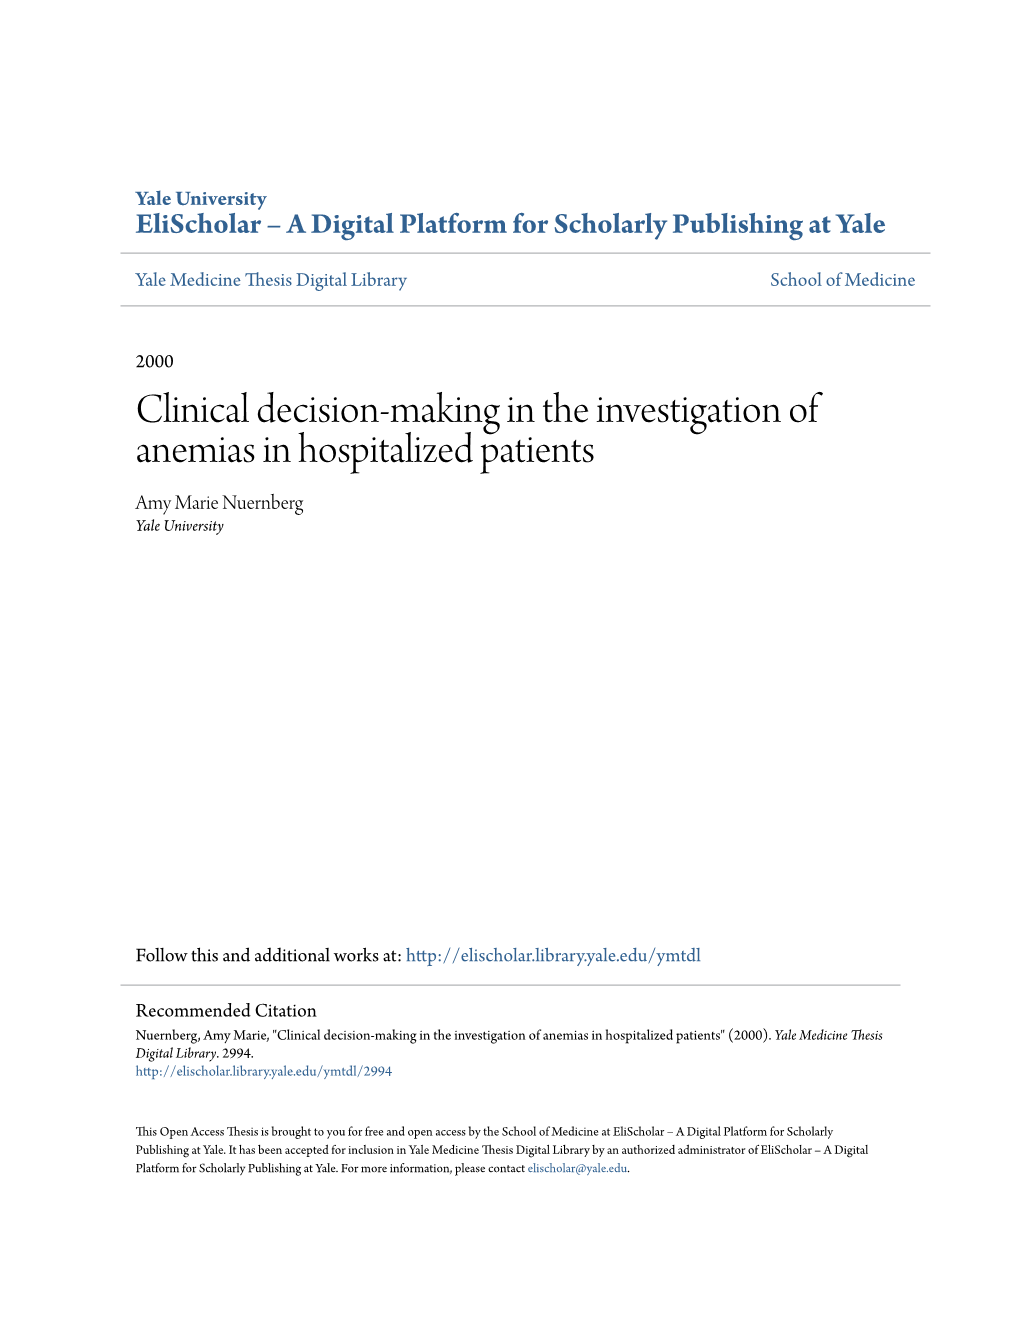 Clinical Decision-Making in the Investigation of Anemias in Hospitalized Patients Amy Marie Nuernberg Yale University